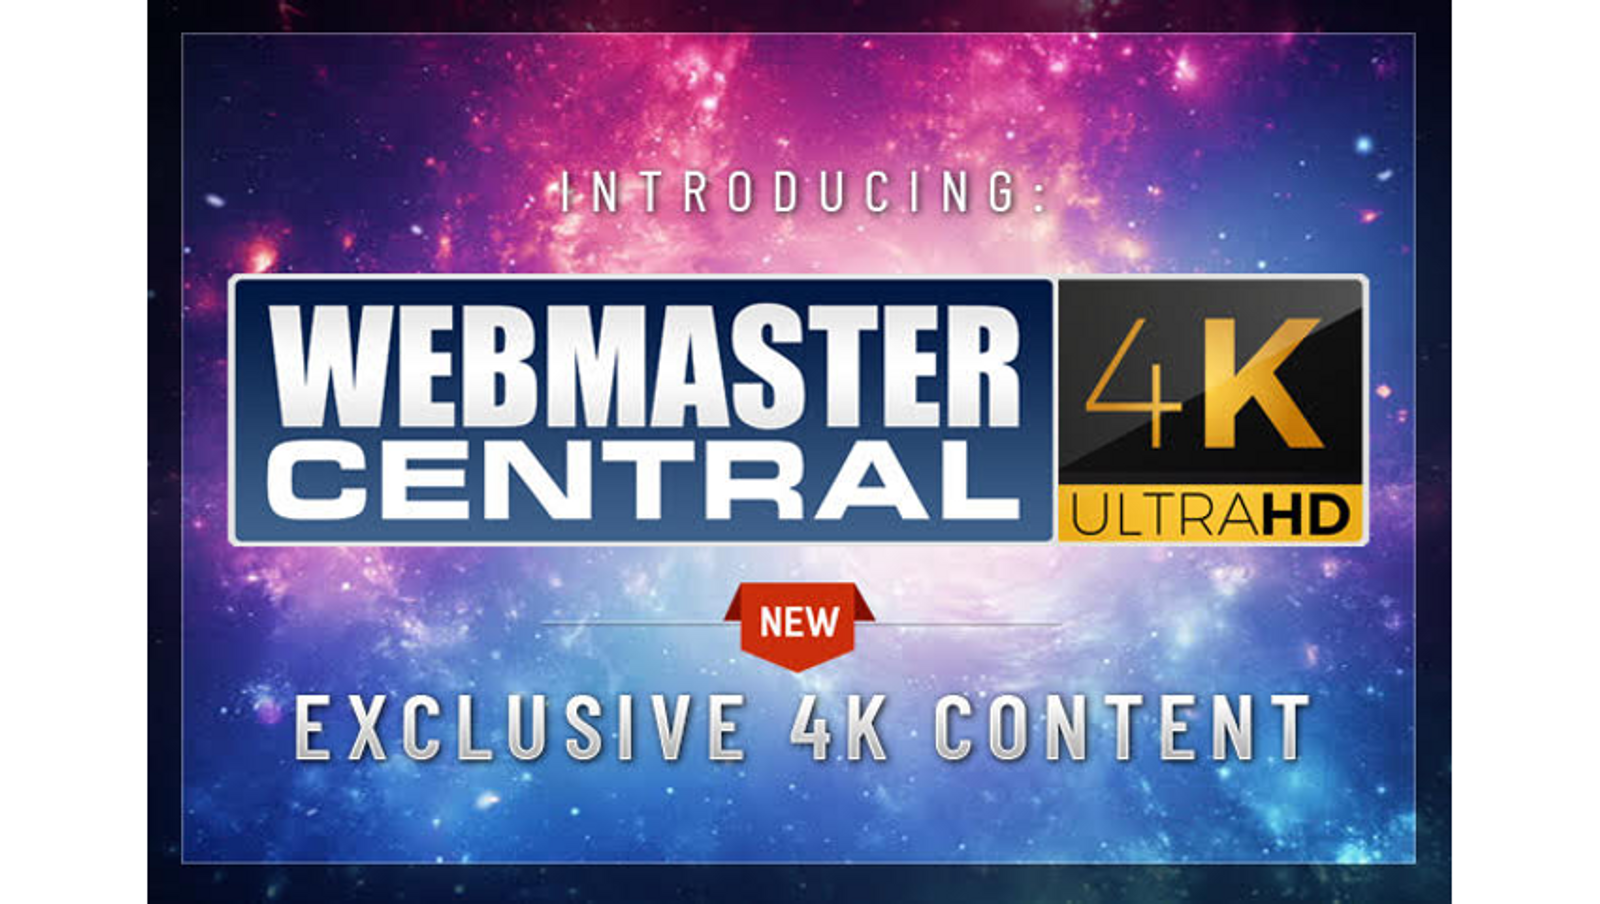 Webmaster Central Now Produces 4K Content for Site Owners